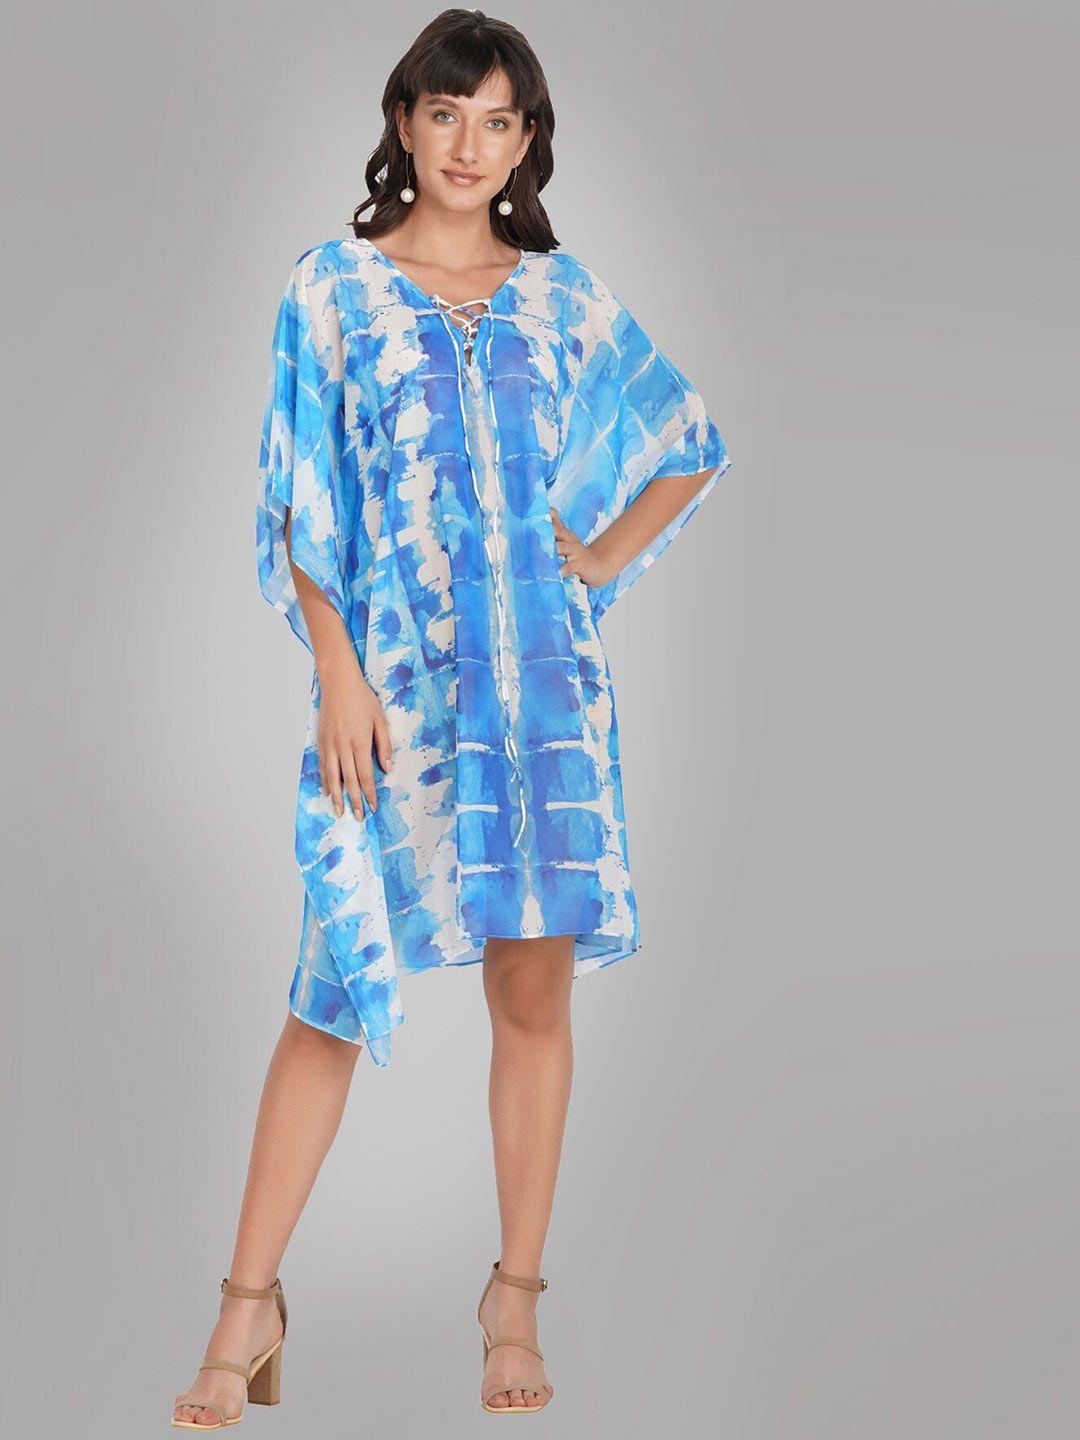 rajoria-instyle-multicoloured-tie-and-dye-dyed-georgette-ethnic-kaftan-dress